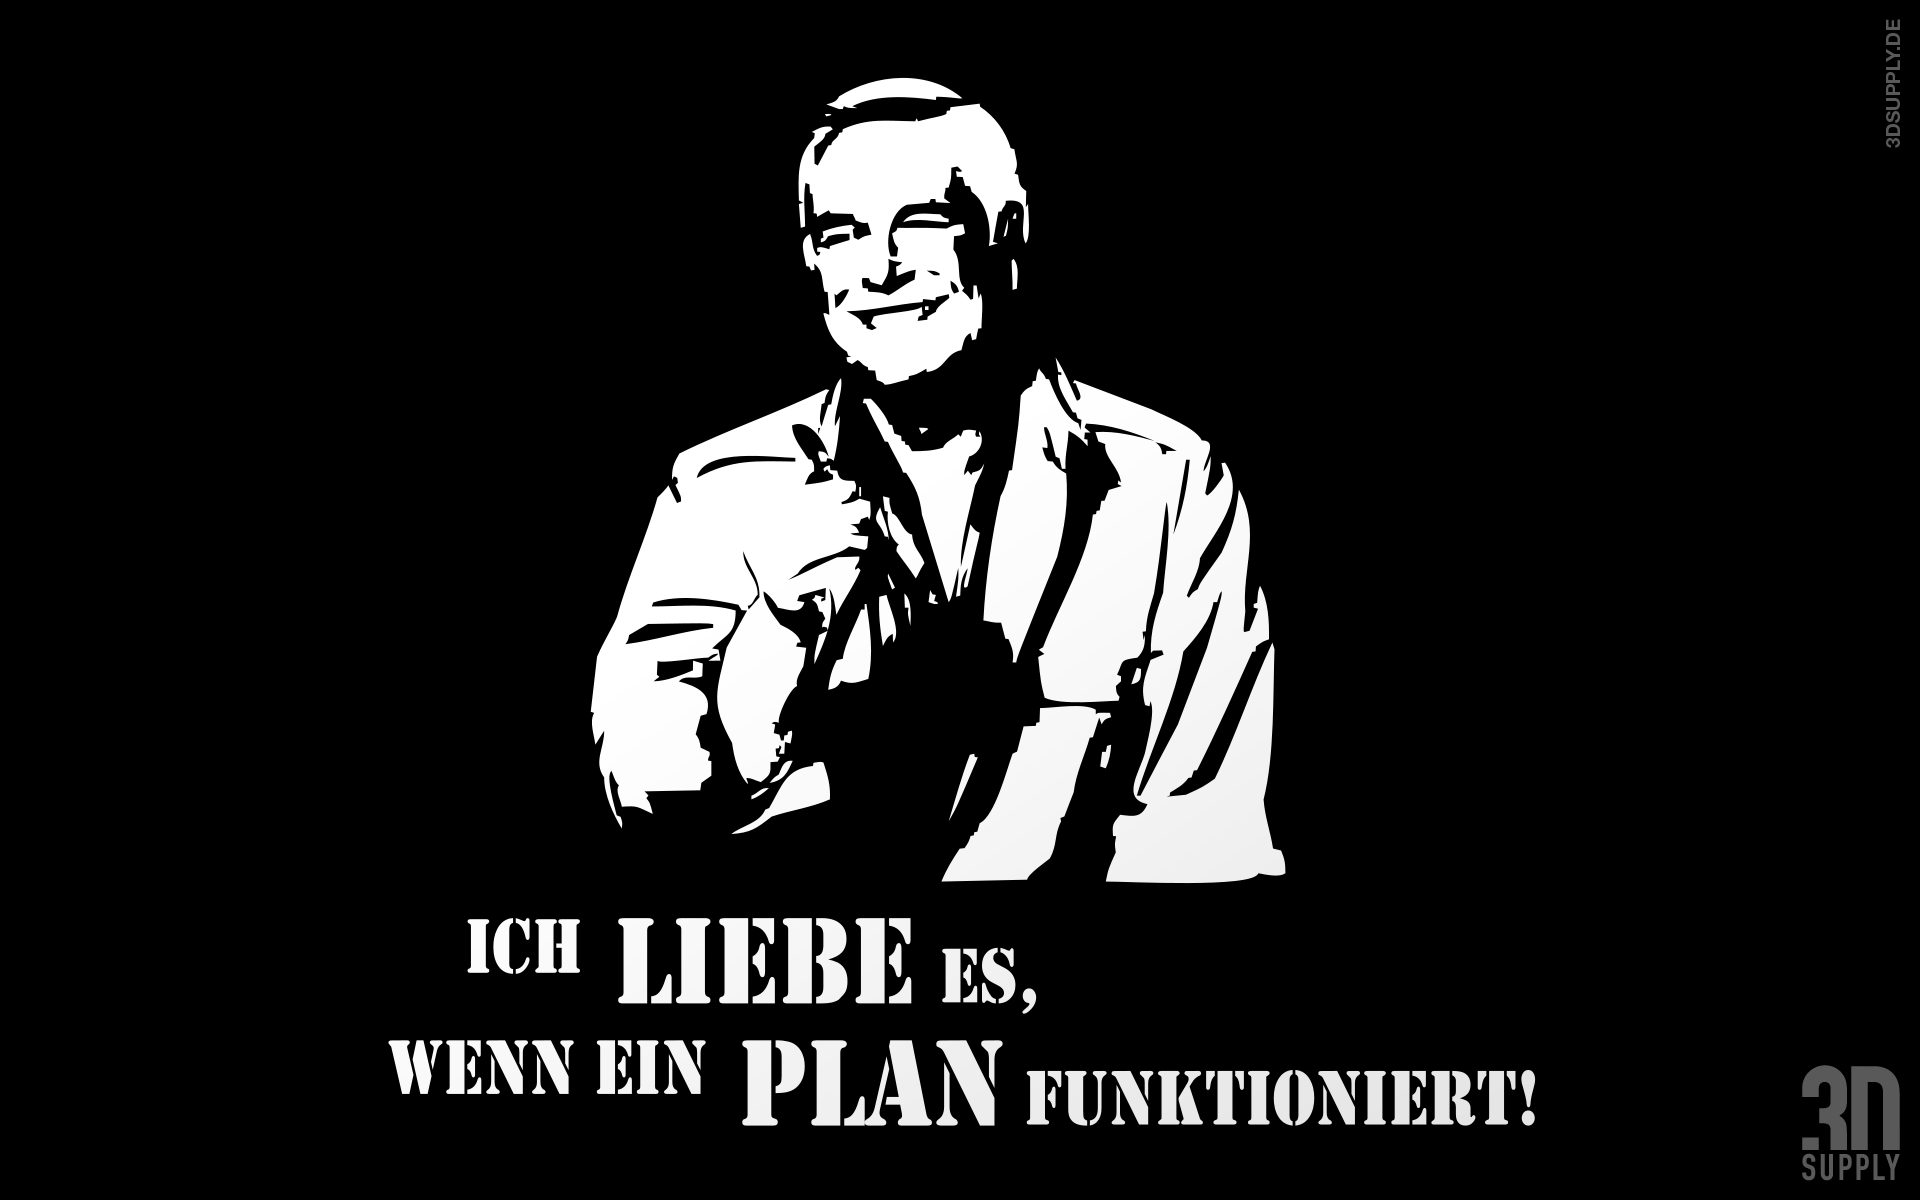 funktioniert-liebe-products-images-wallpaper.jpg